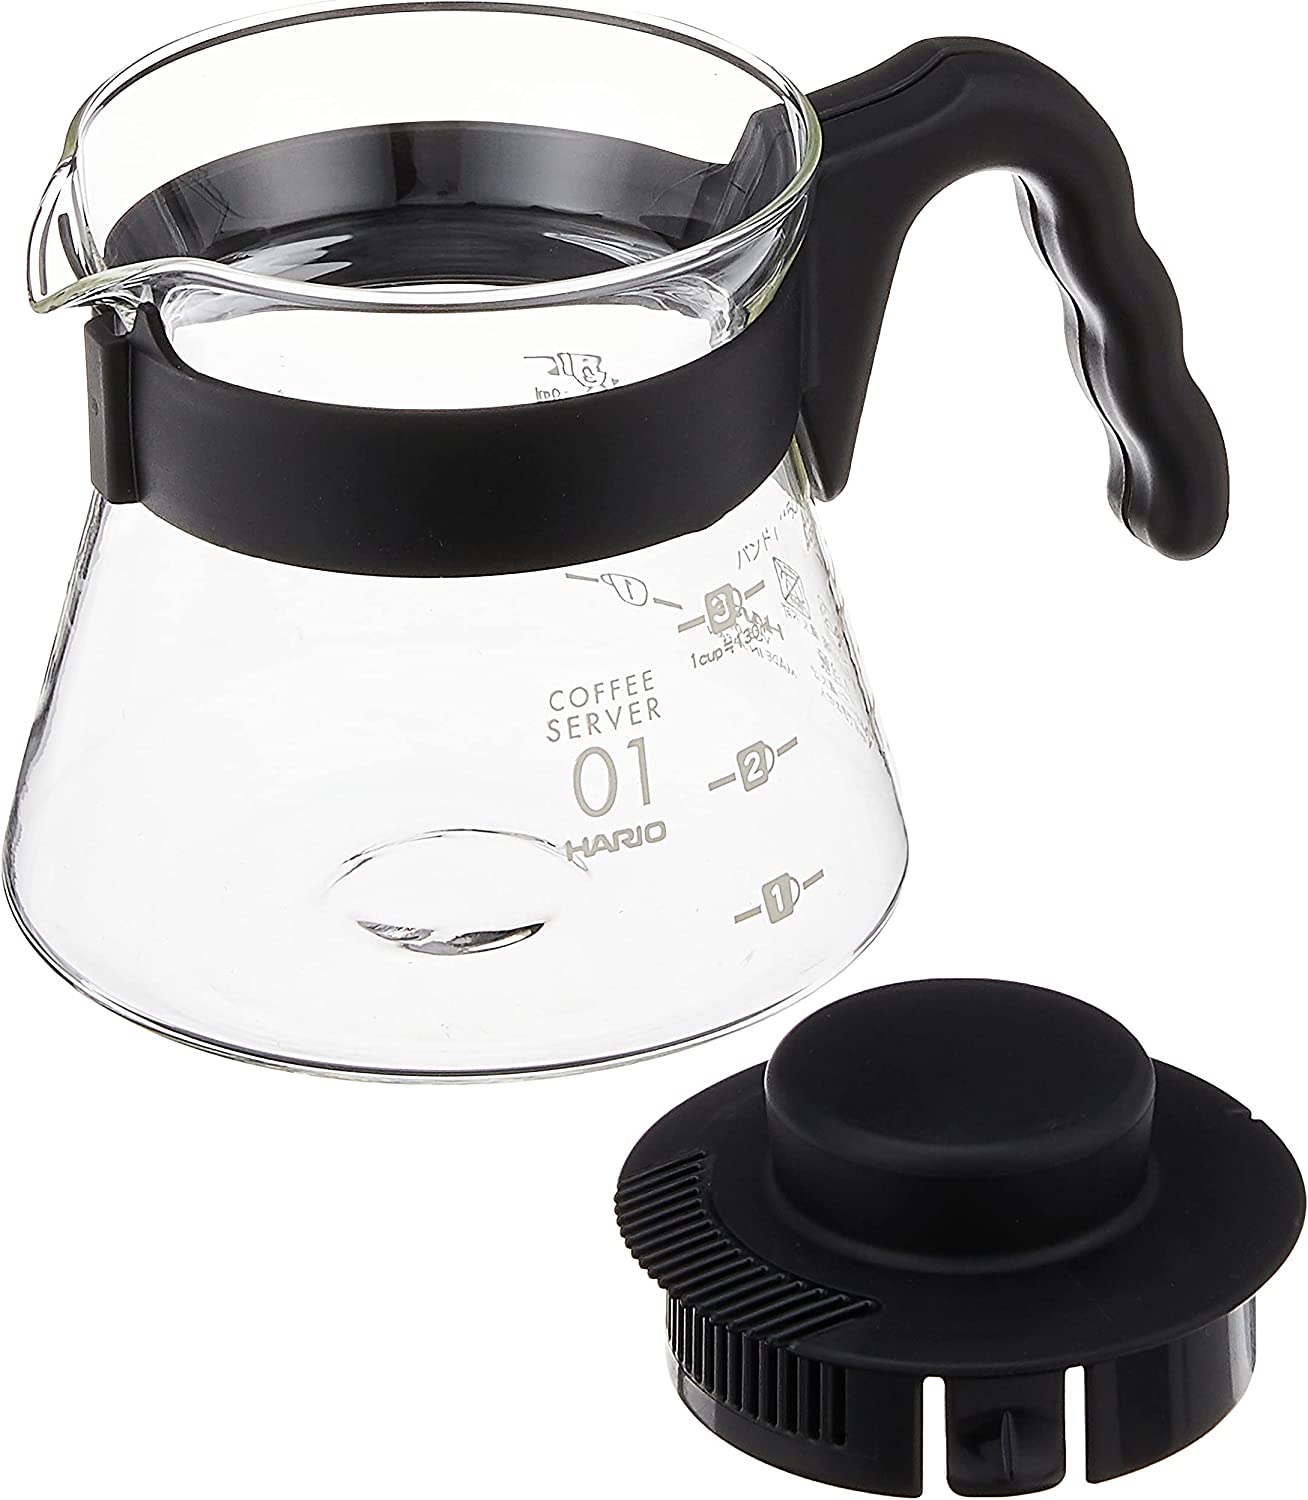 HARIO( HARIO ) V60 coffee server microwave oven / dishwasher correspondence 450ml black made in Japan VCS-01B stylish coffee supplies made in Japan 